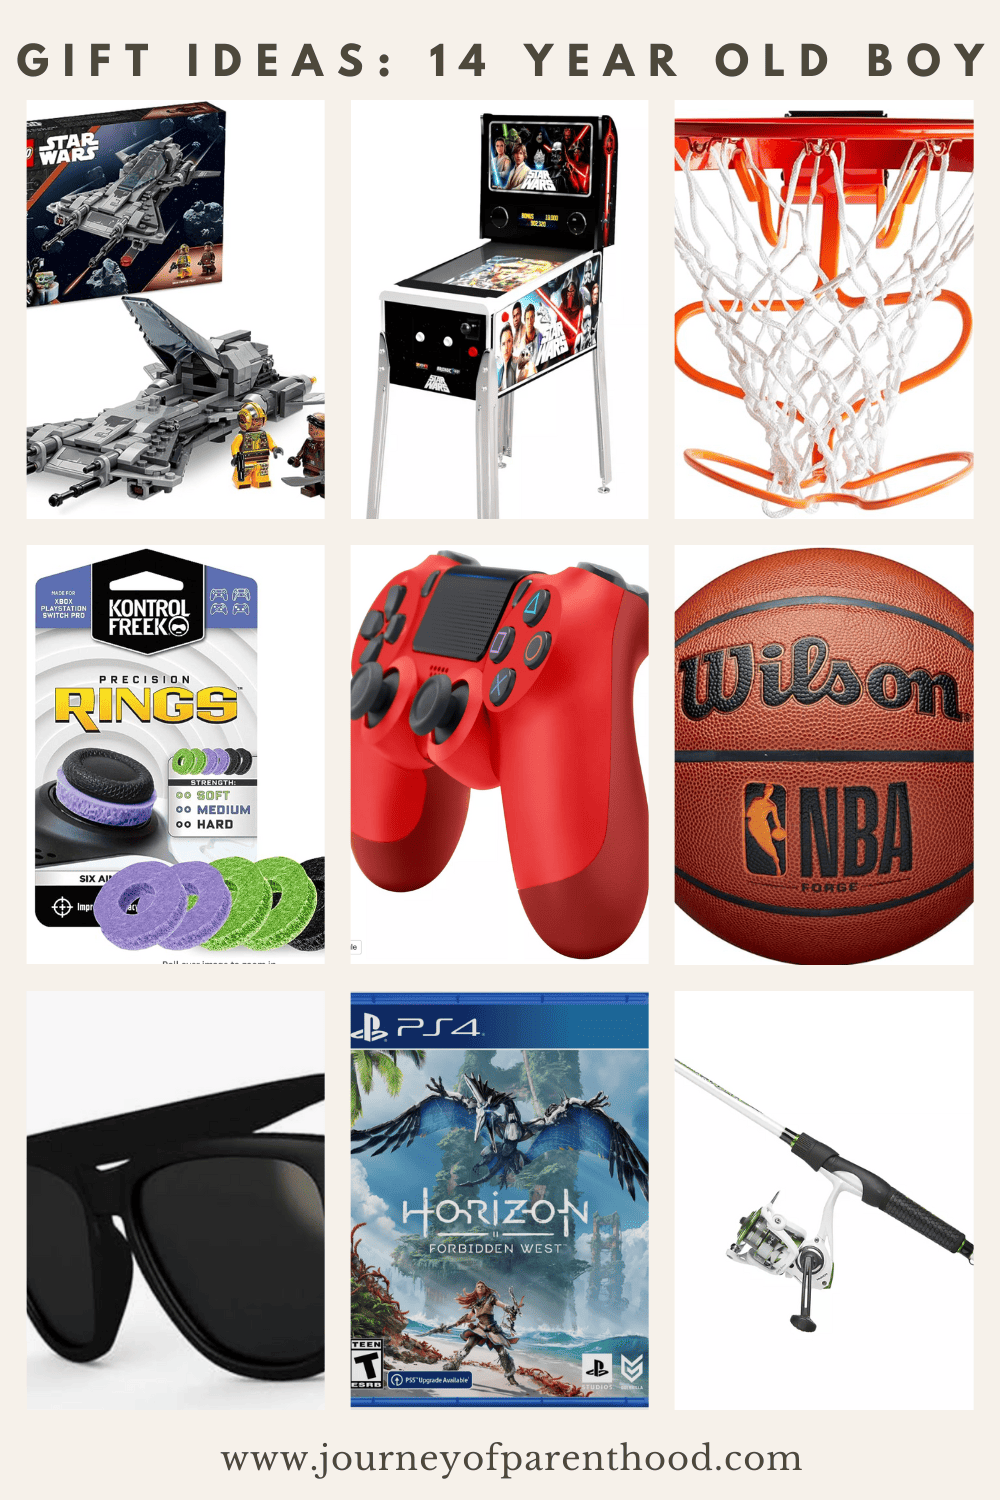 Gift ideas for 14 year old boy - teenage boy gift guide and what i'm buying my teenage son for Christmas this year